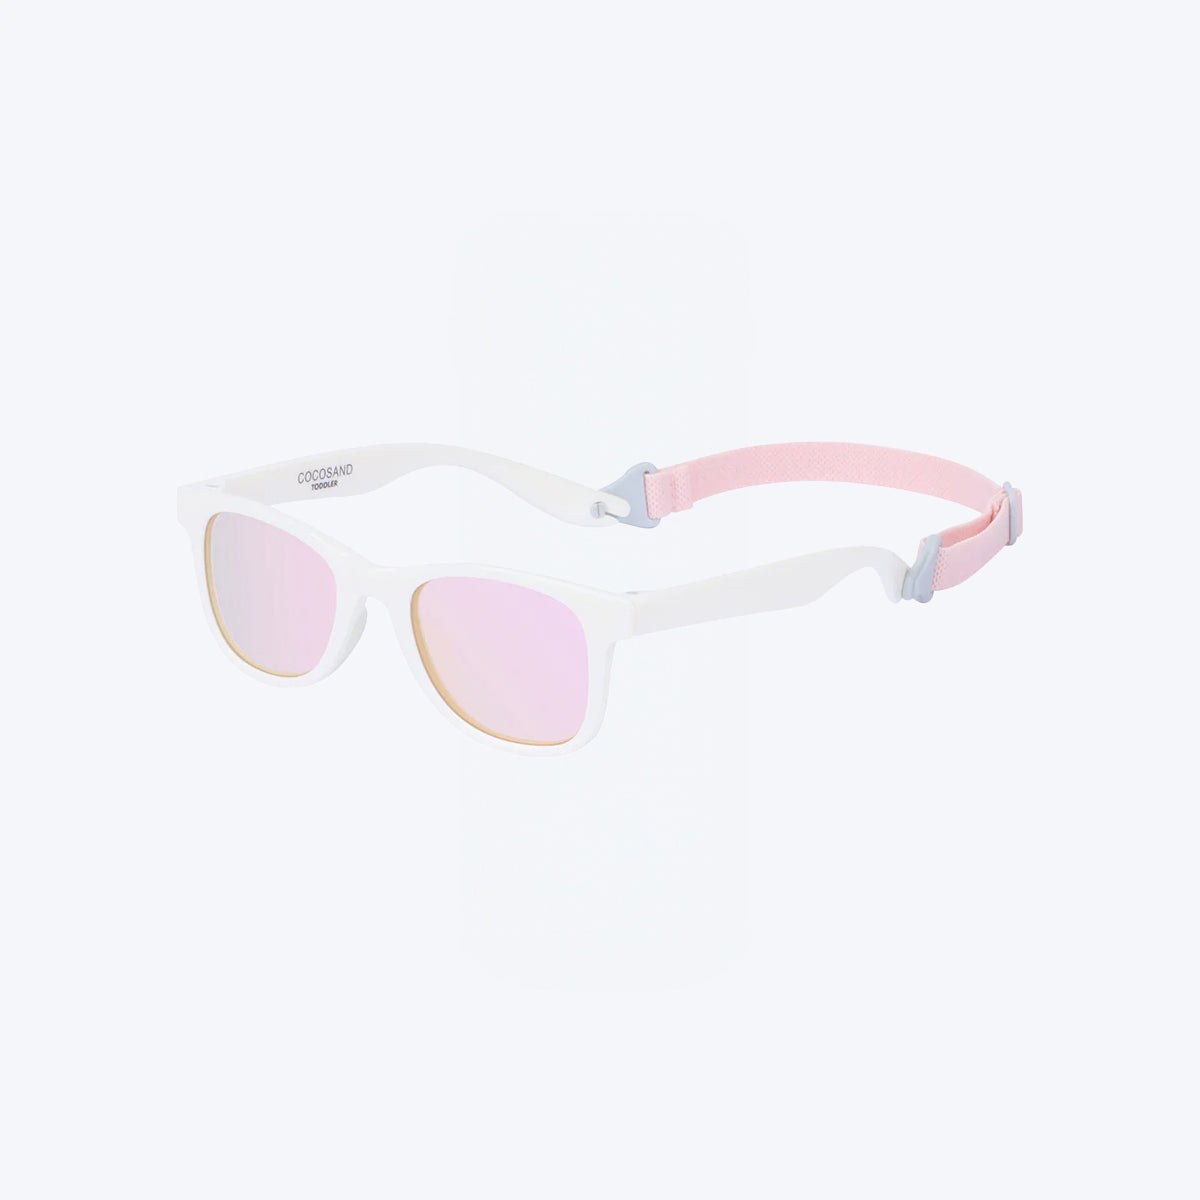 White and pink baby sunglasses by Cocosand.